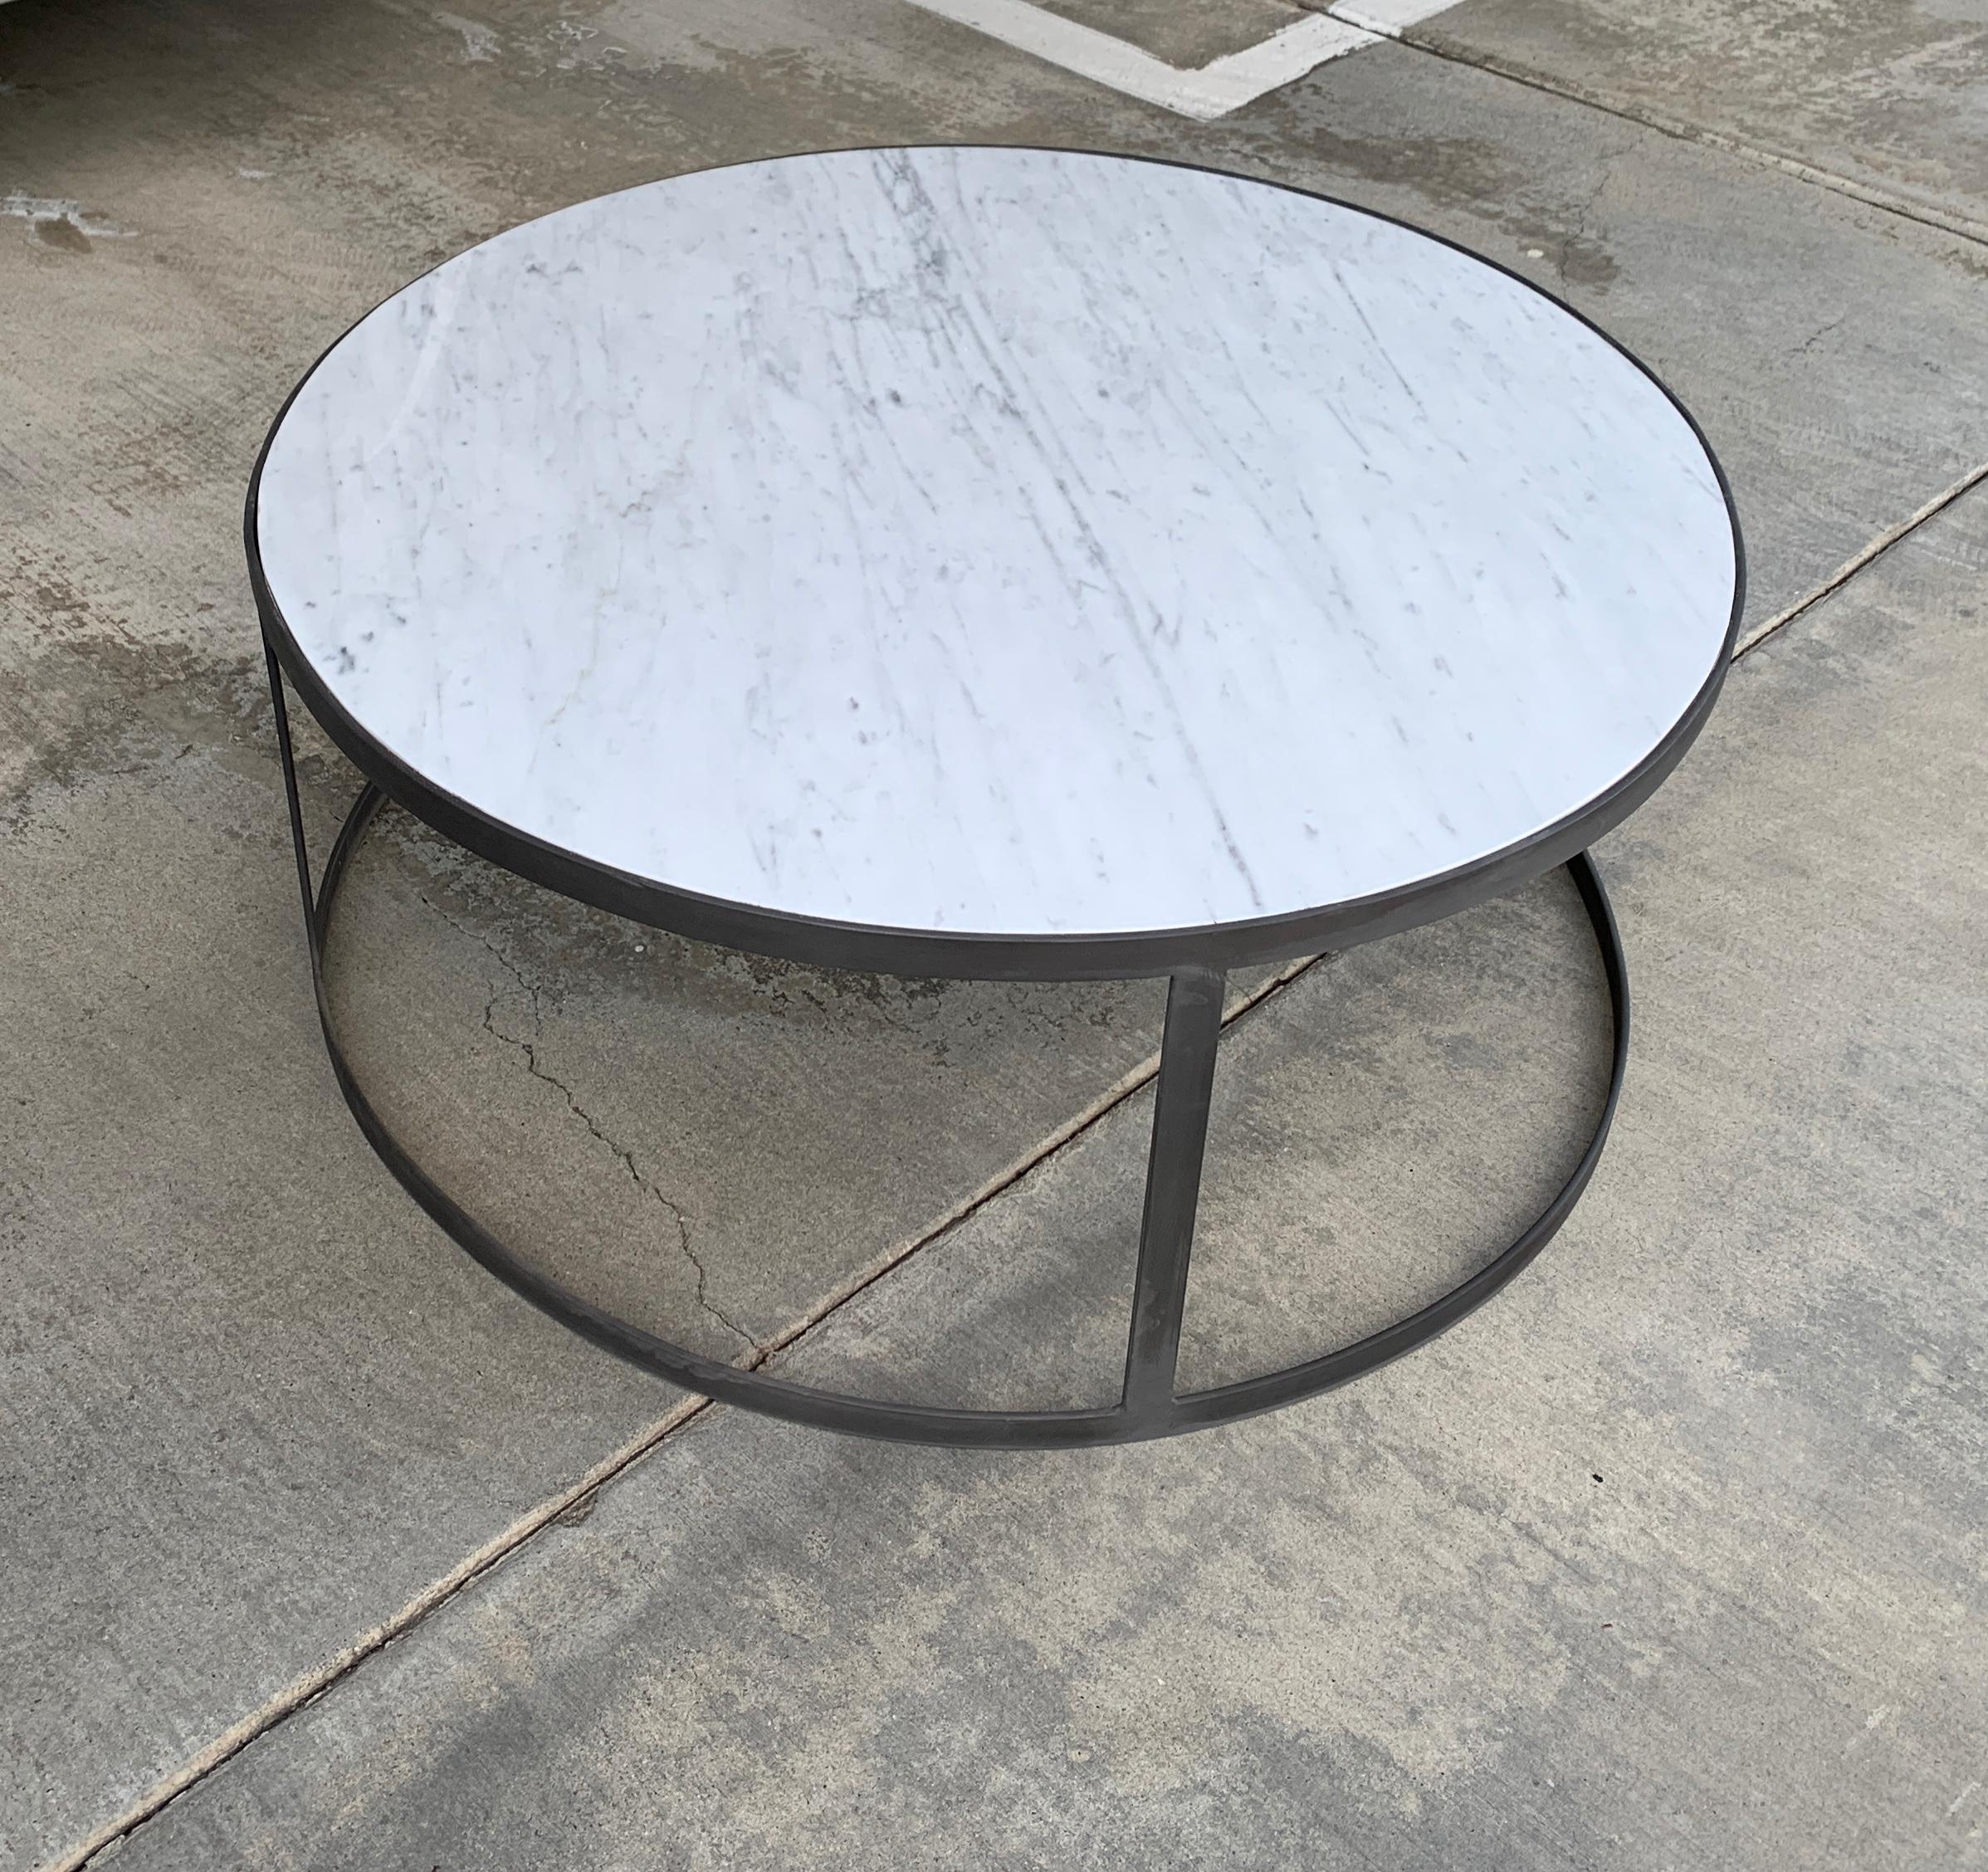 A Carrara marble-top coffee table with an Iron finished round base. The top is new and the base is vintage. We had to replace the old top which had broken. The base has been re-coated in an iron finish, please see the detailed photos. Nice veining